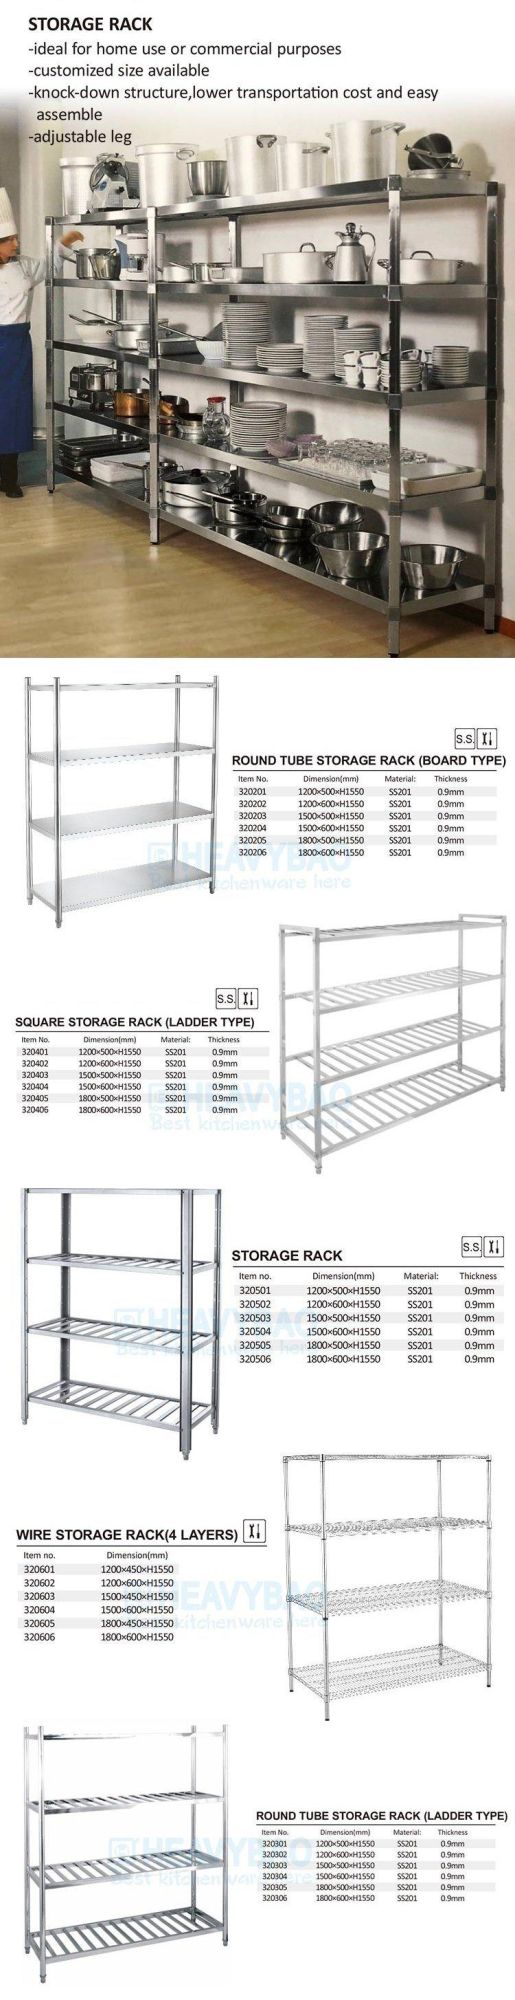 Heavybao Hot Sale Knock-Down Structure Stainless Steel Storage Shelf Rack